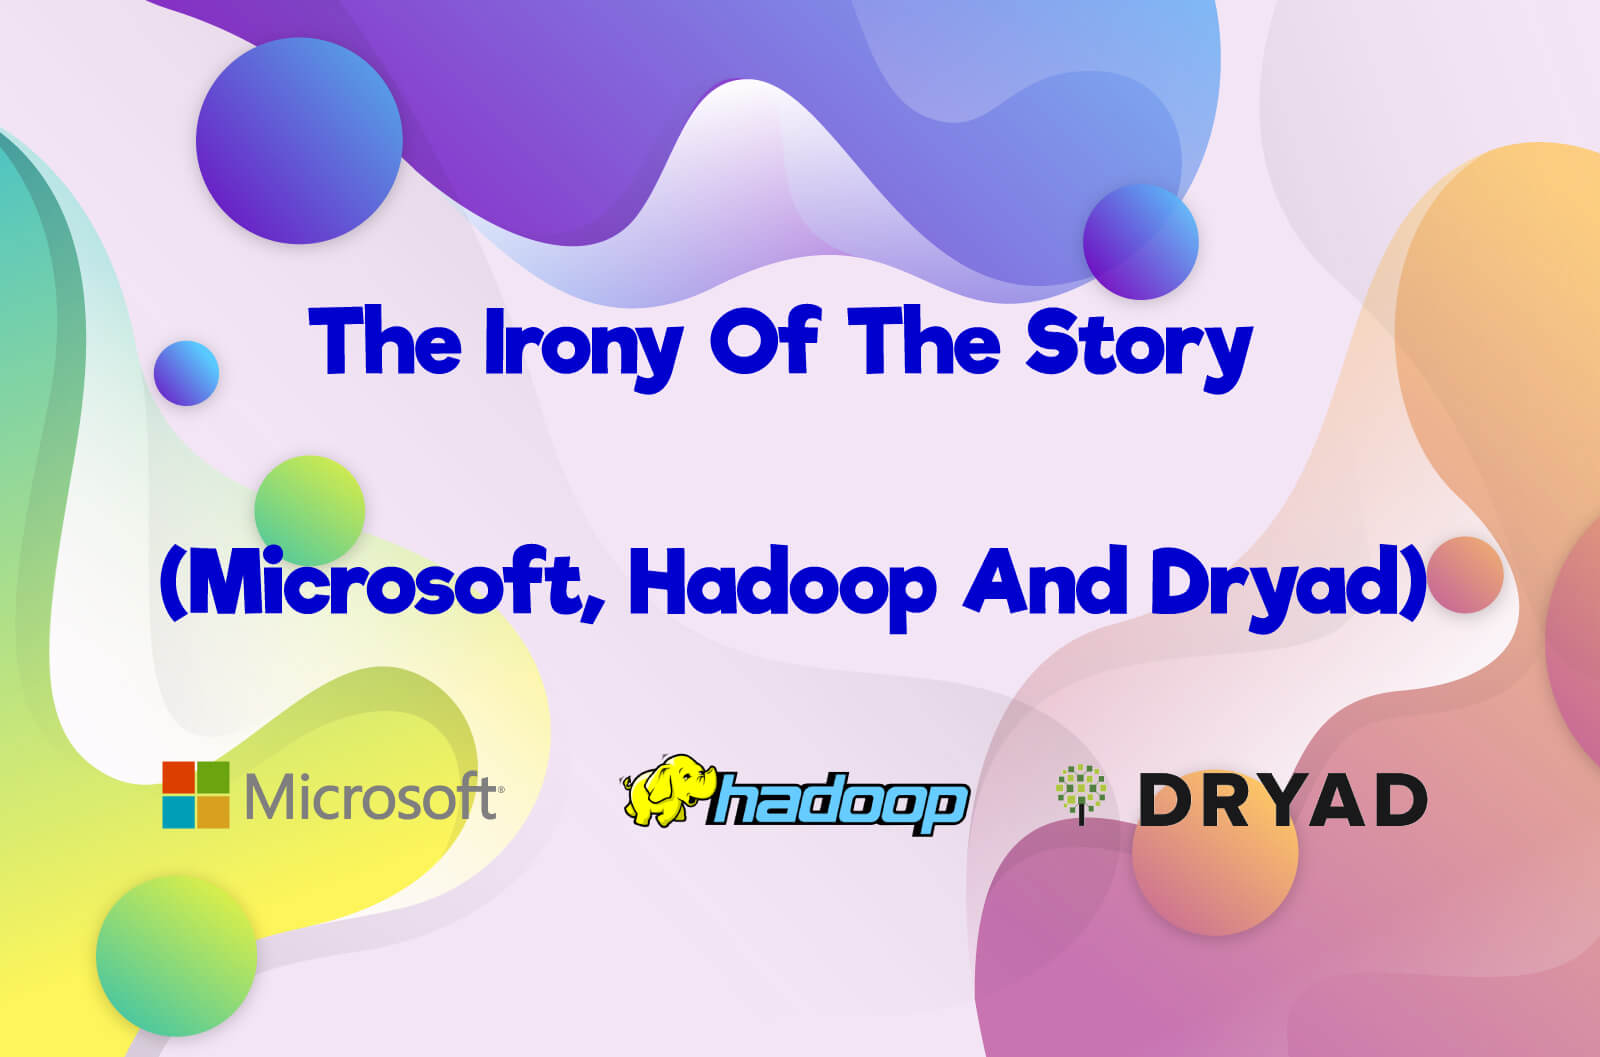 The irony of the story (Microsoft, Hadoop and Dryad)